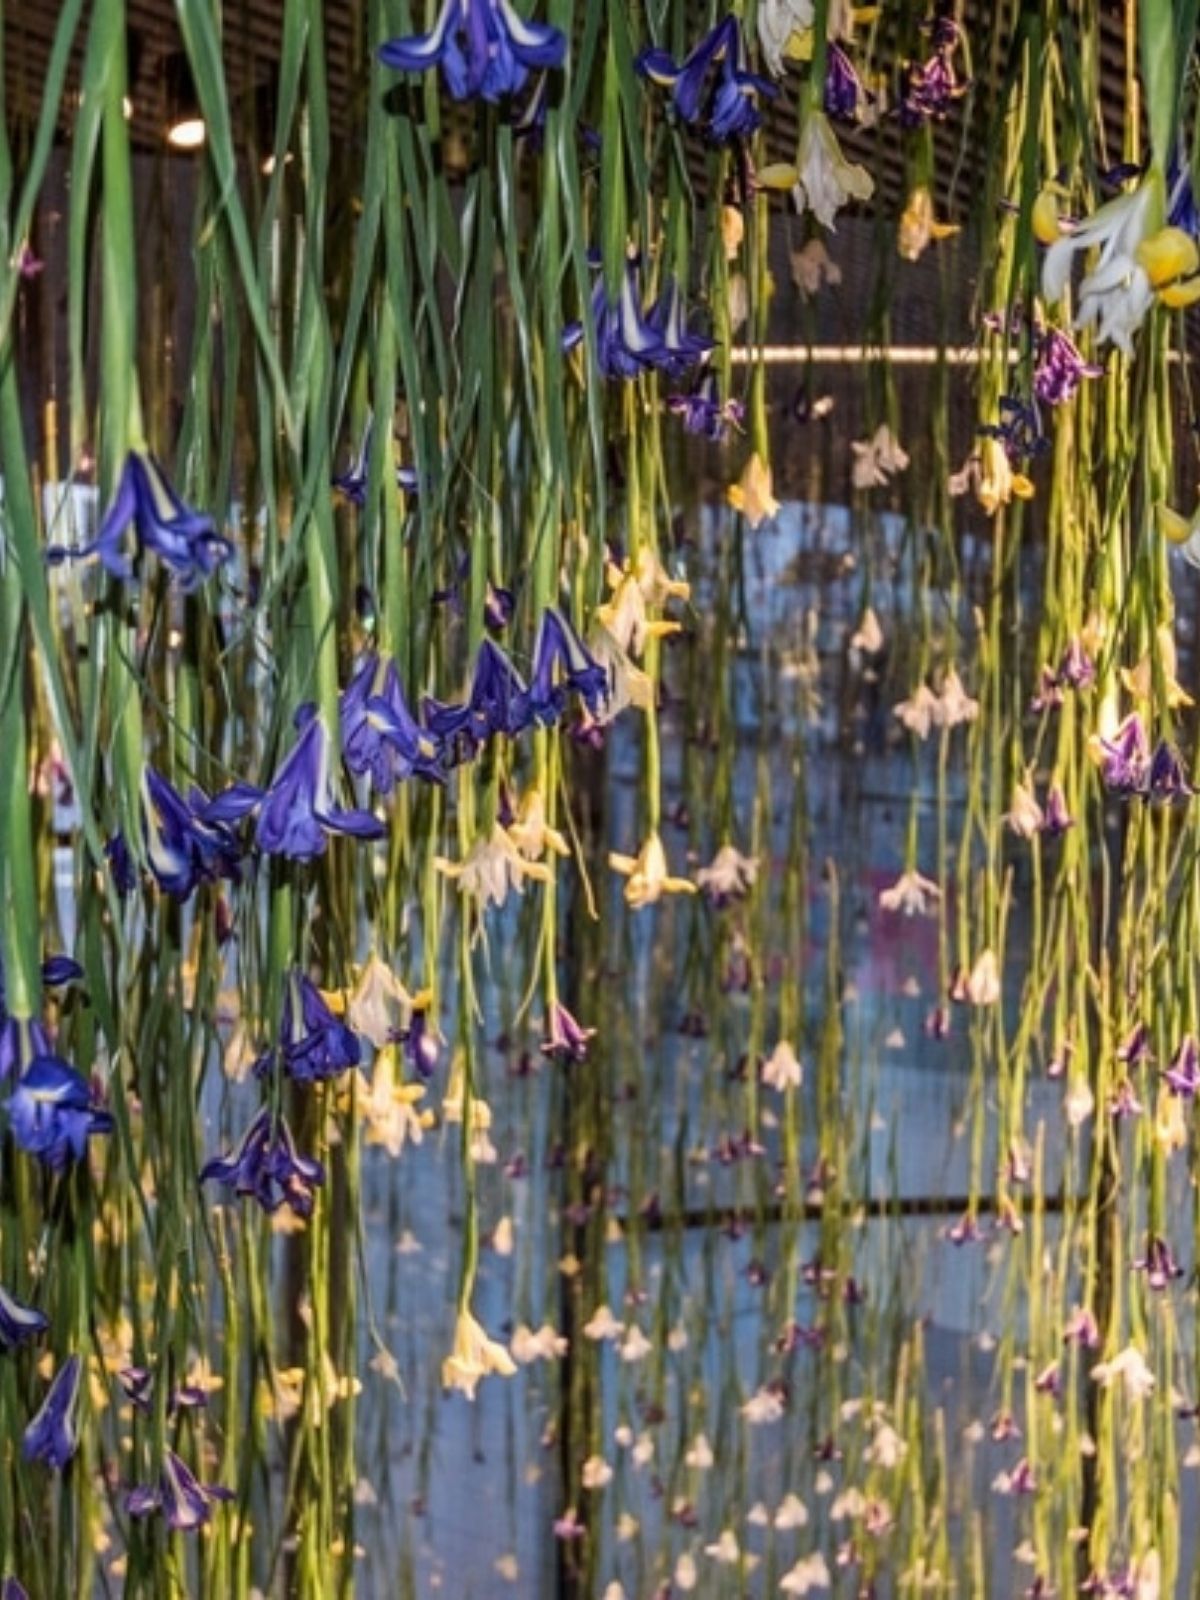 The Iris in a Sculptural and Painterly Fashion - rebecca louise law - iris exhibition - hanging iris flowers - on thursd